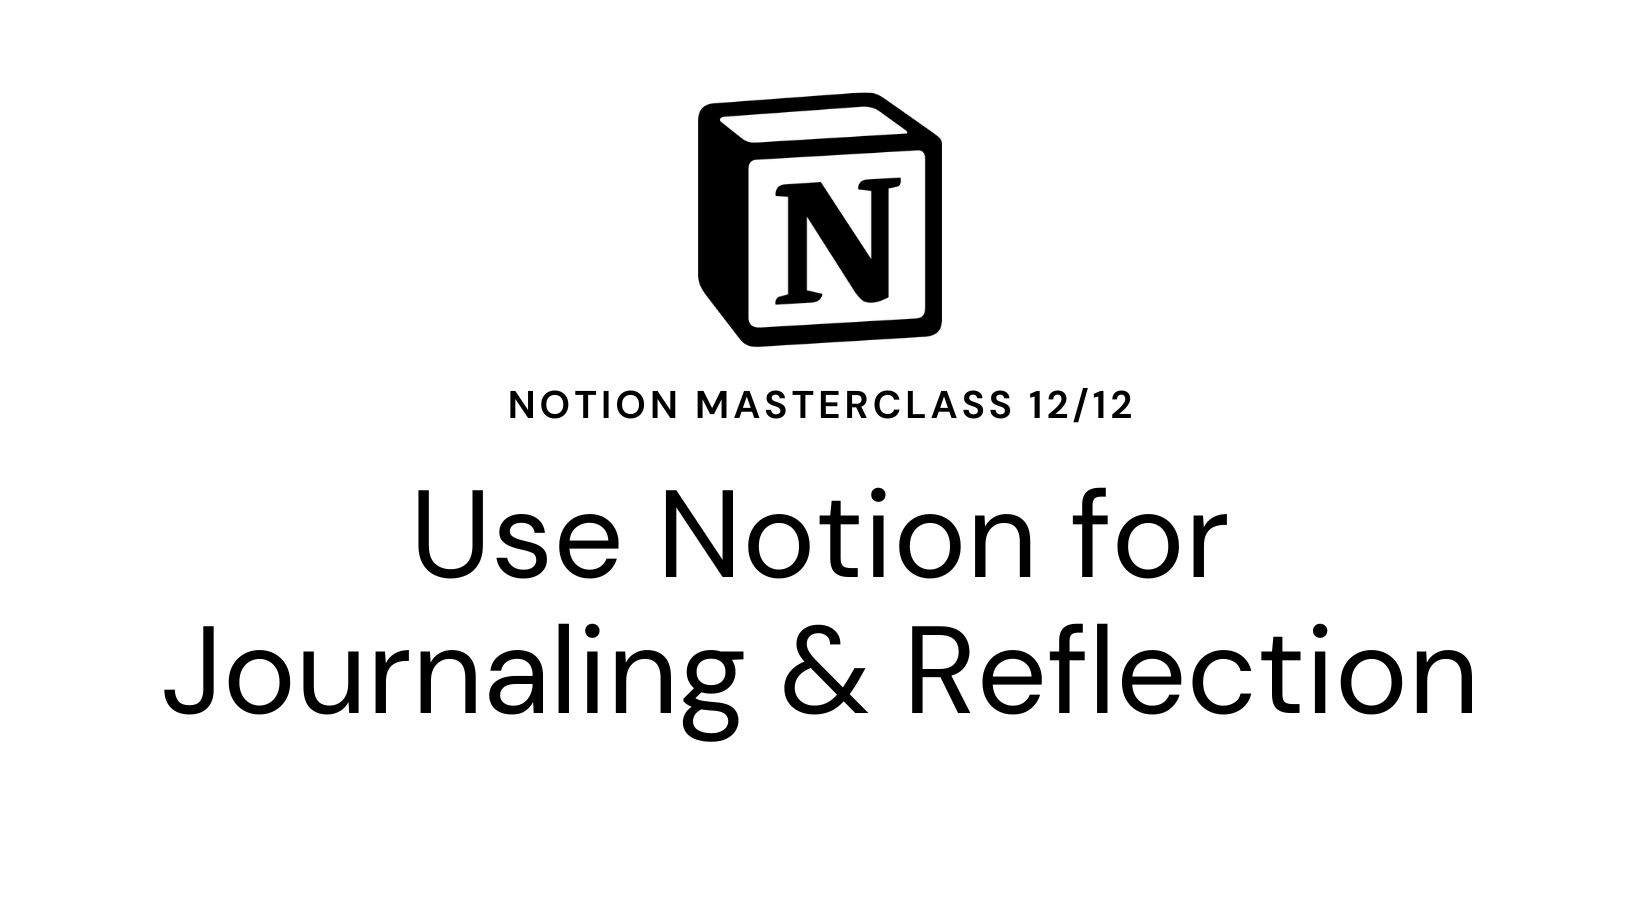 Notion Masterclass 12/12 Use Notion for Journaling & Reflection